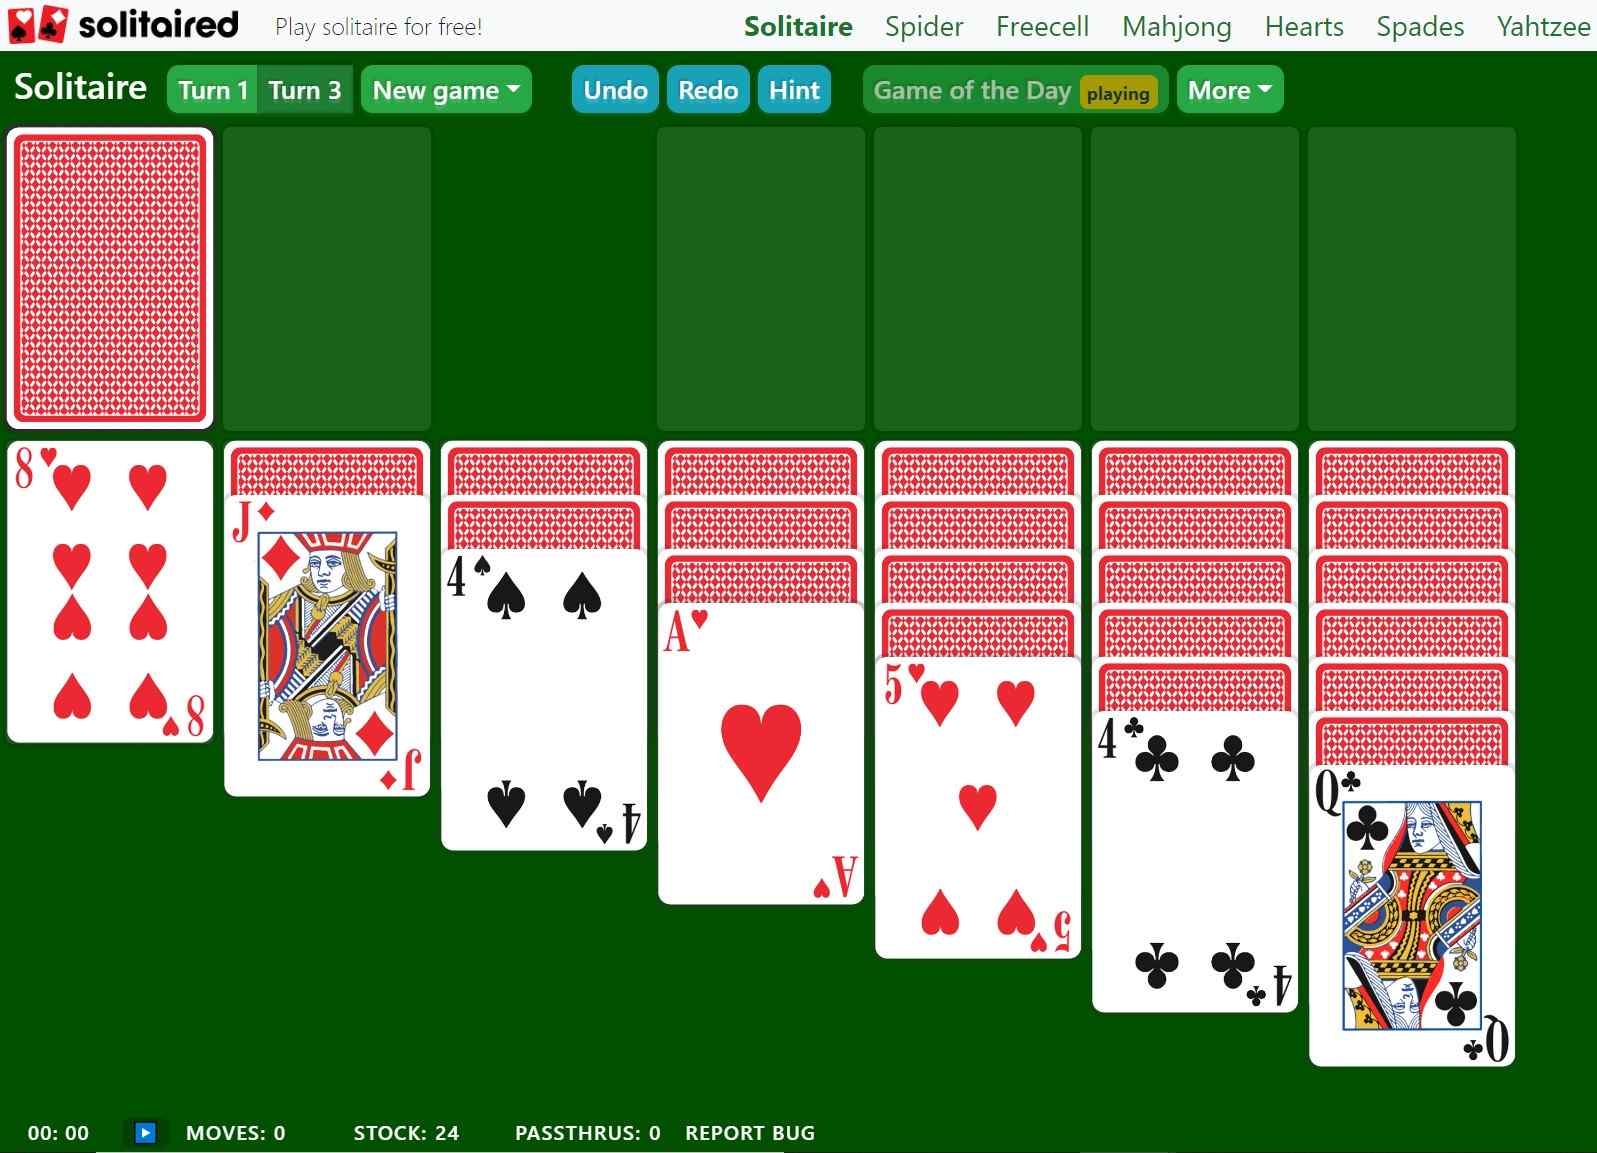 If you like trying different solitaire games, you’ll enjoy Solitaired.